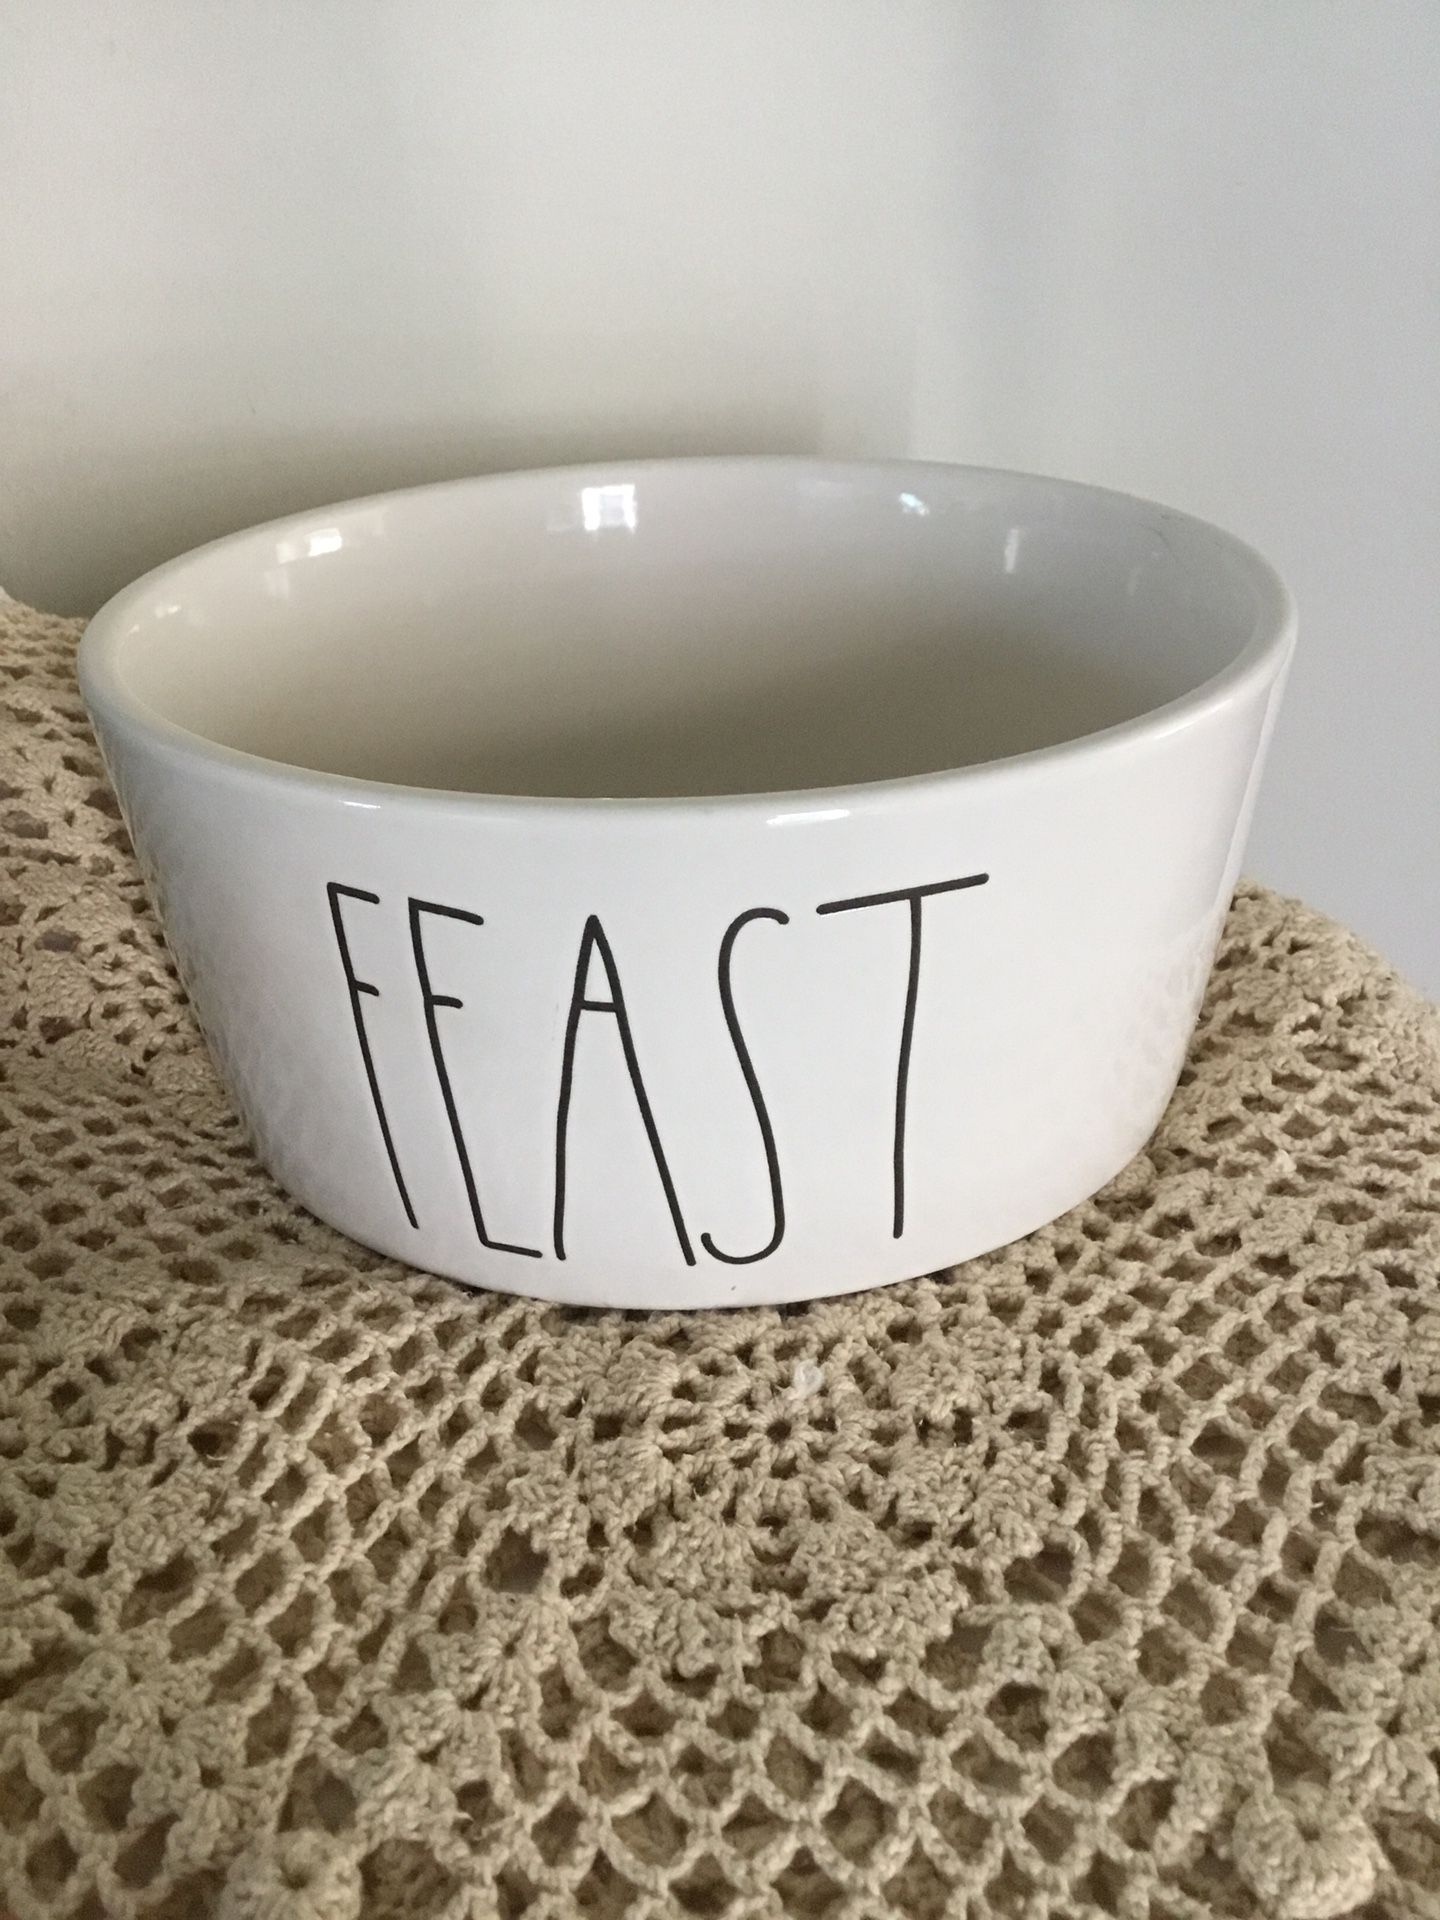 Rae Dunn dog bowl feast in large letters on the front ceramic never used